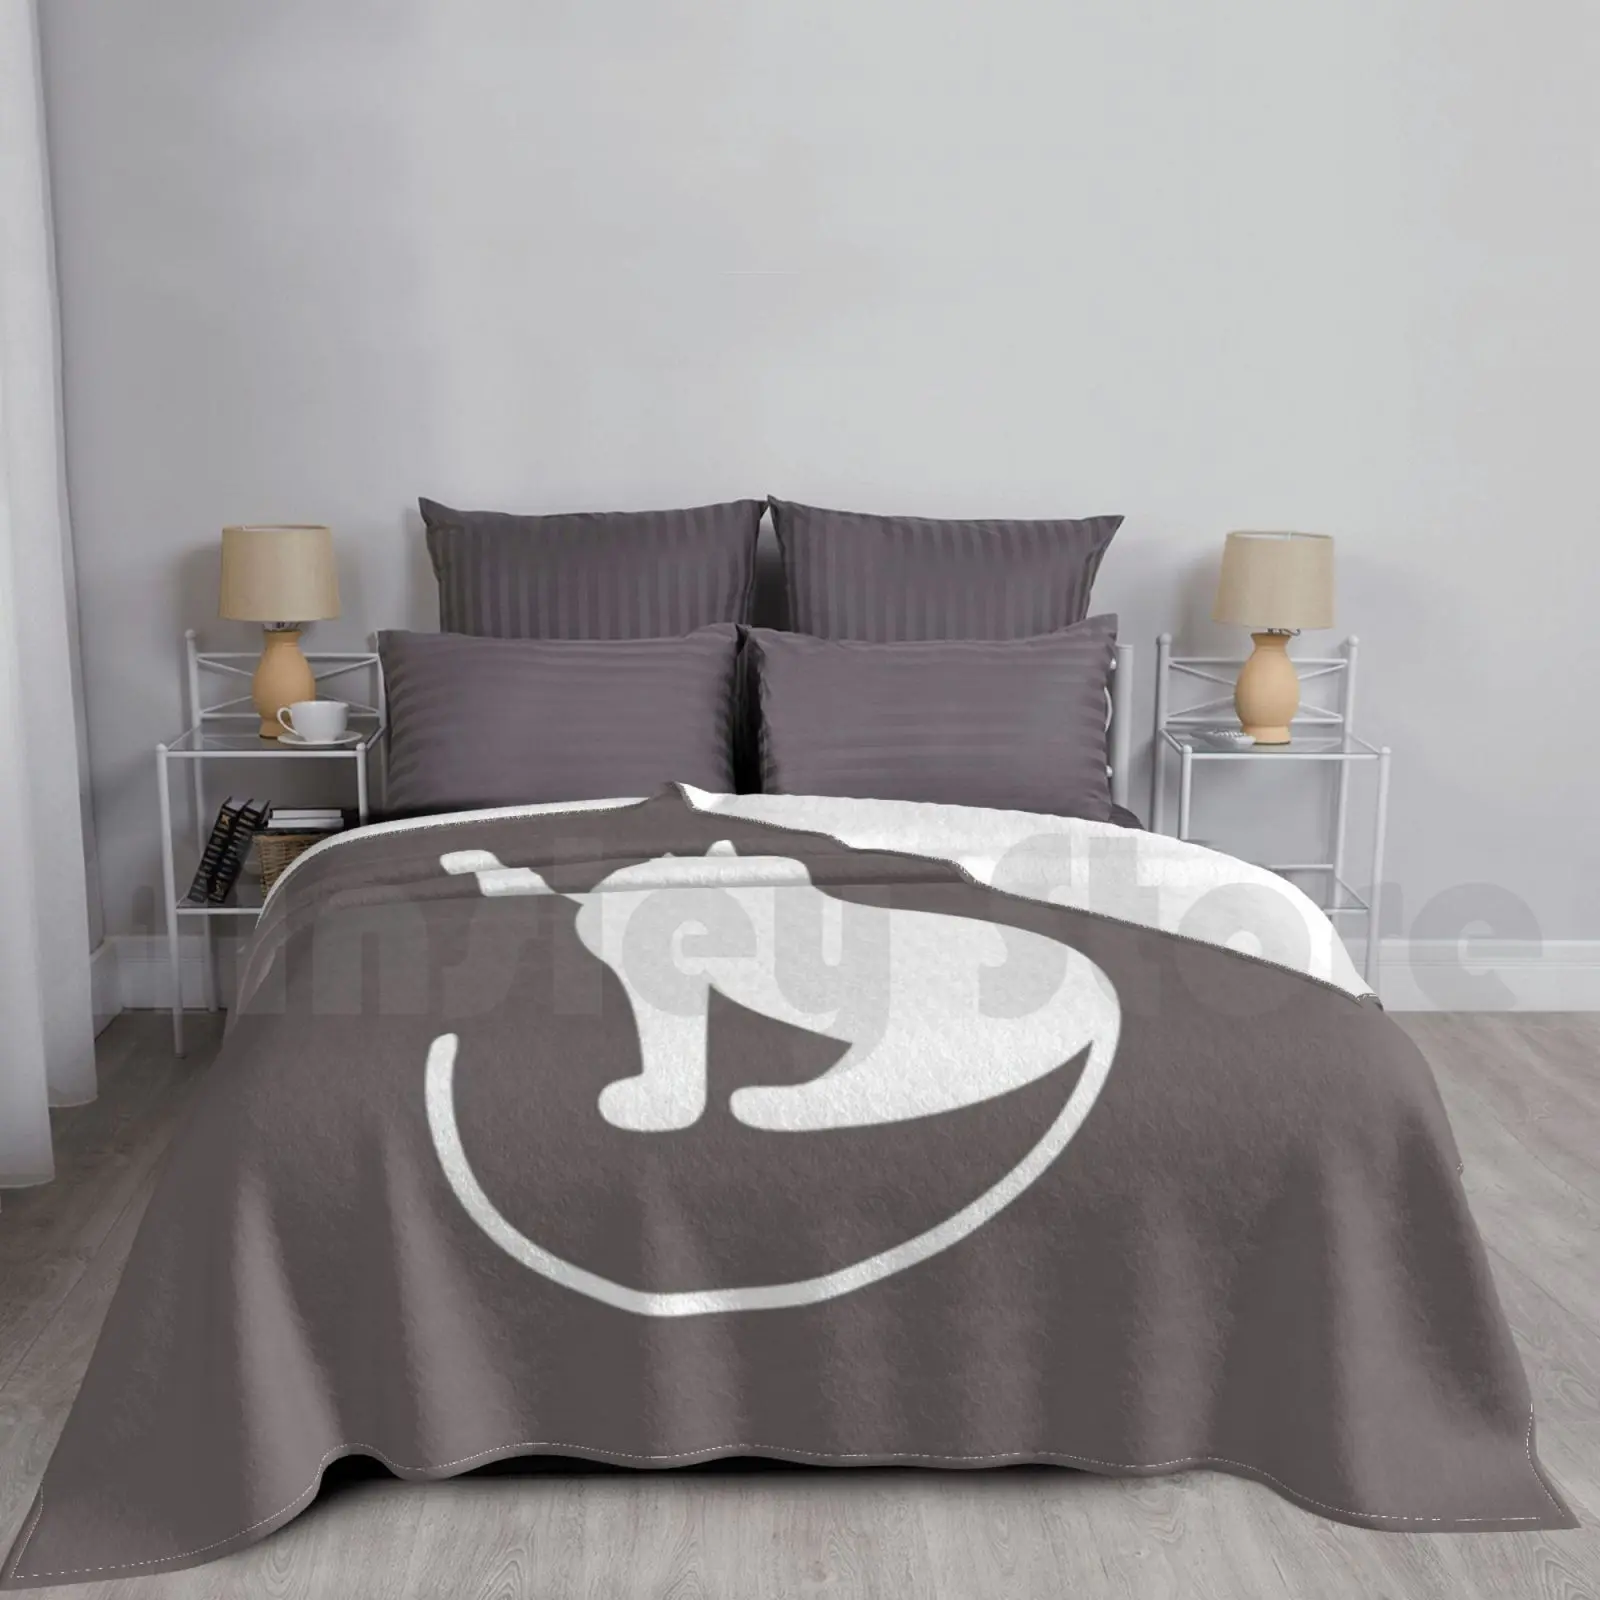 

Peaceful White Cat , For Lover Cats Gifts Blanket Super Soft Warm Light Thin Crazy Cat Lady Funny Cat White Cat